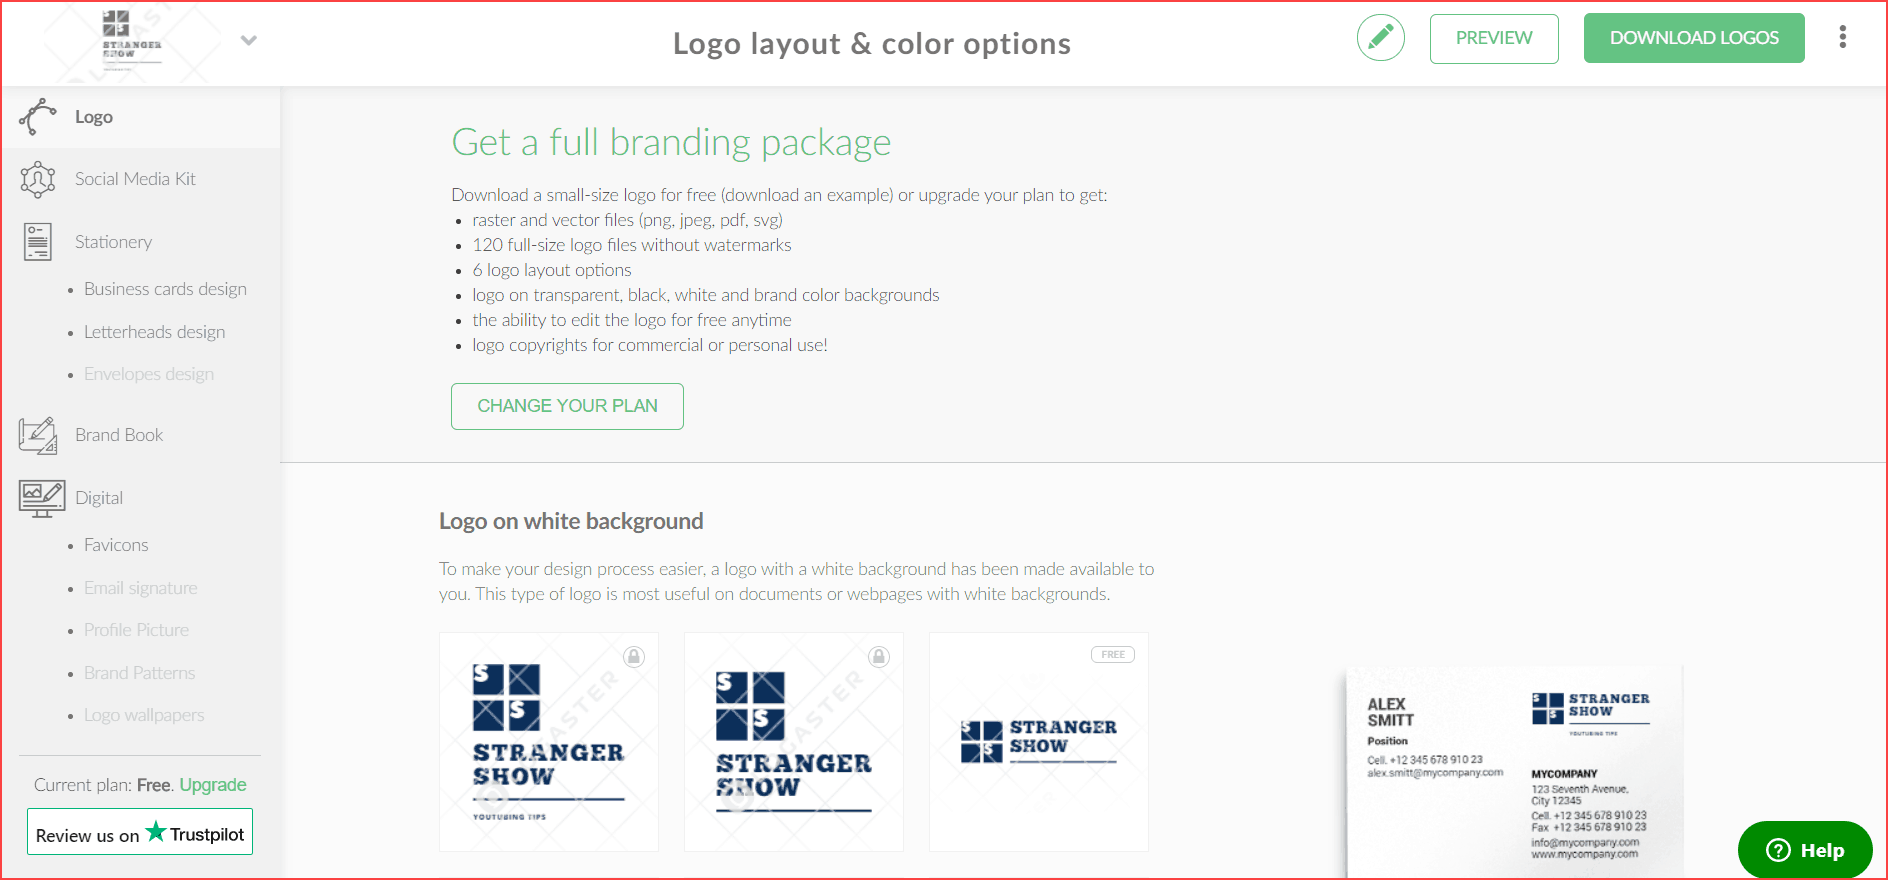 Logo Layout and color options